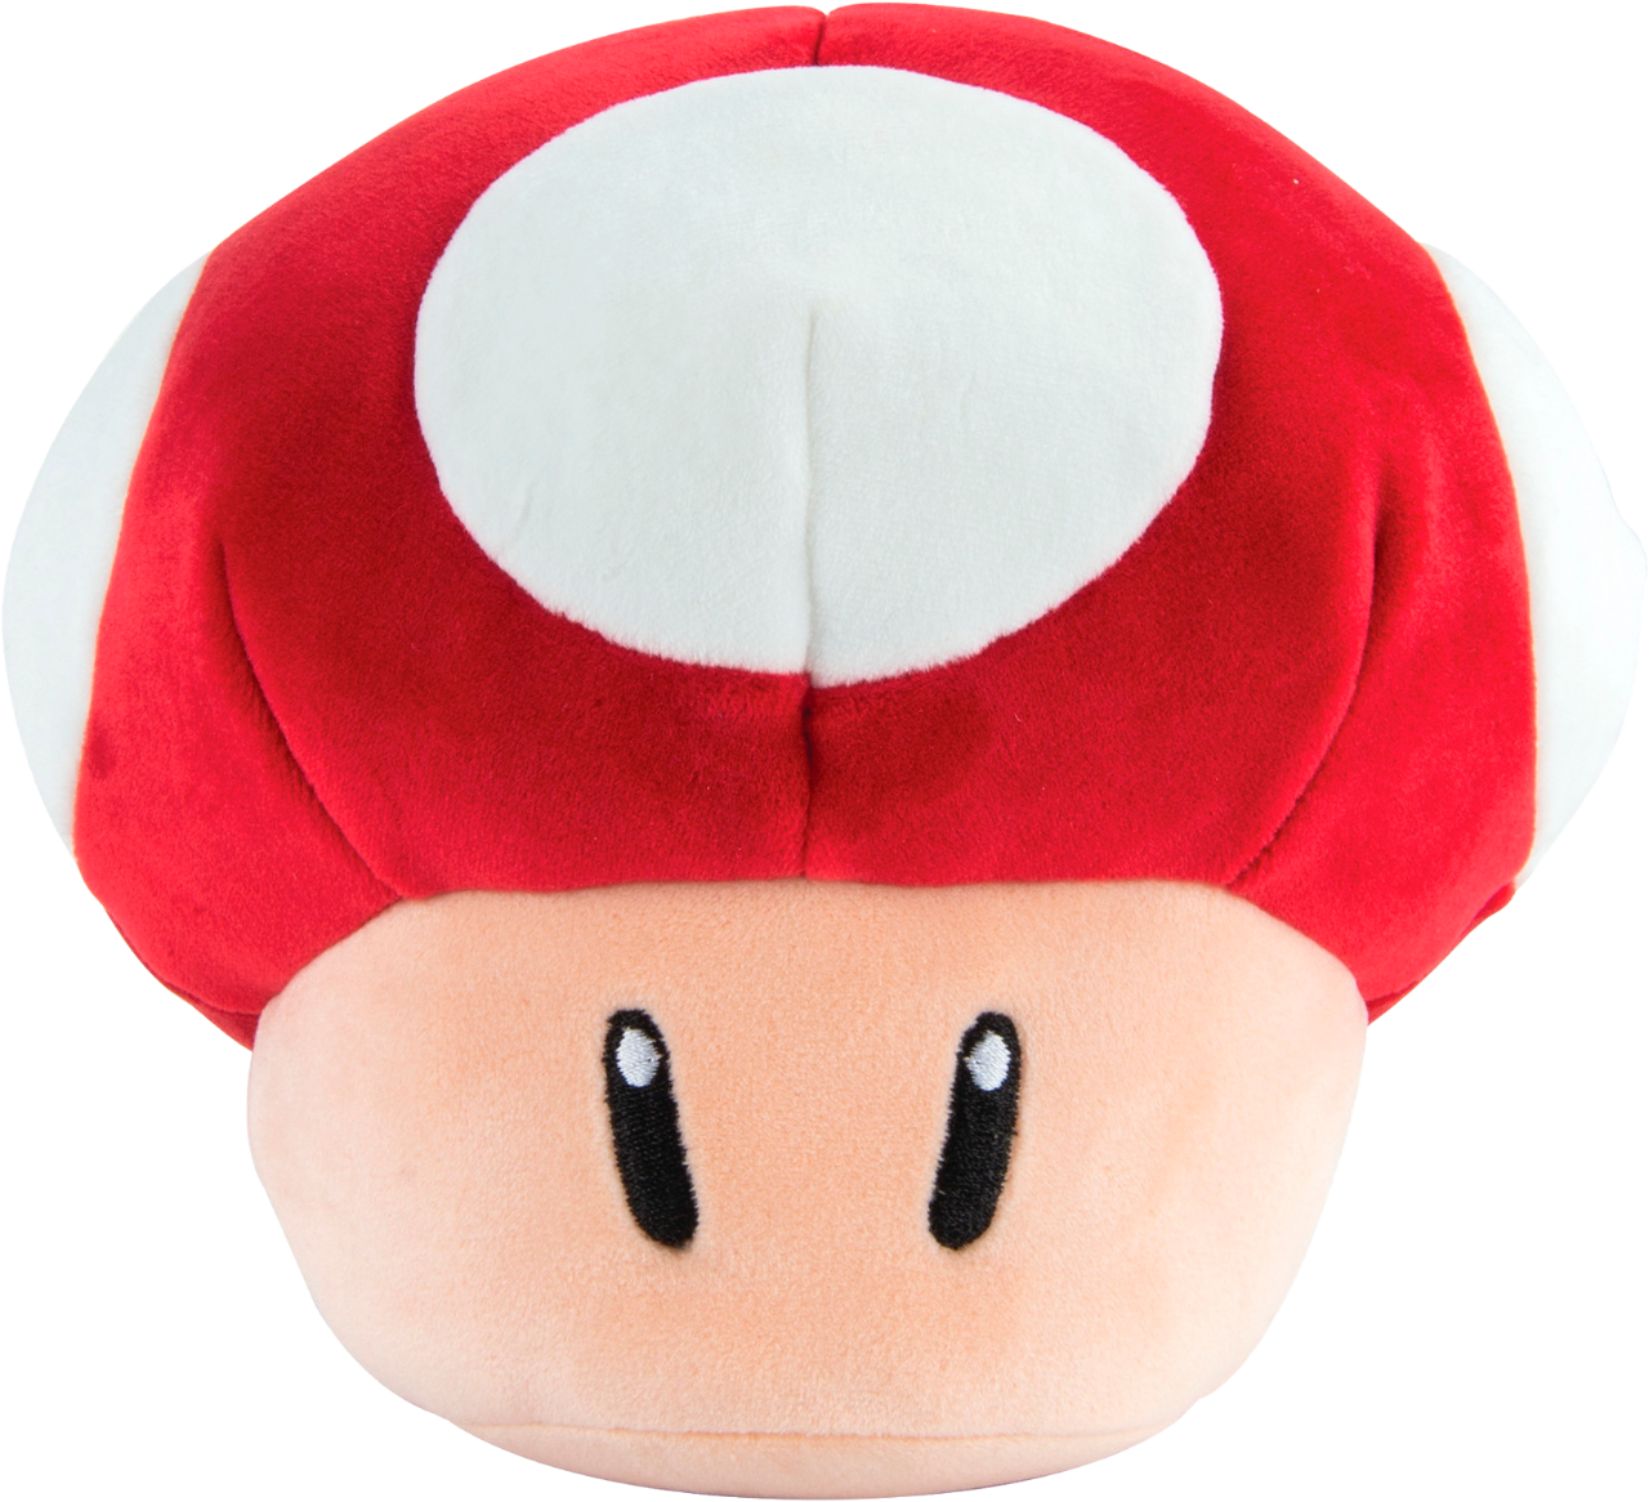 TOMY - Club Mocchi-Mocchi - Super Mario Junior 6 inch Plush Stuffed Toy - Styles May Vary - Styles May Vary